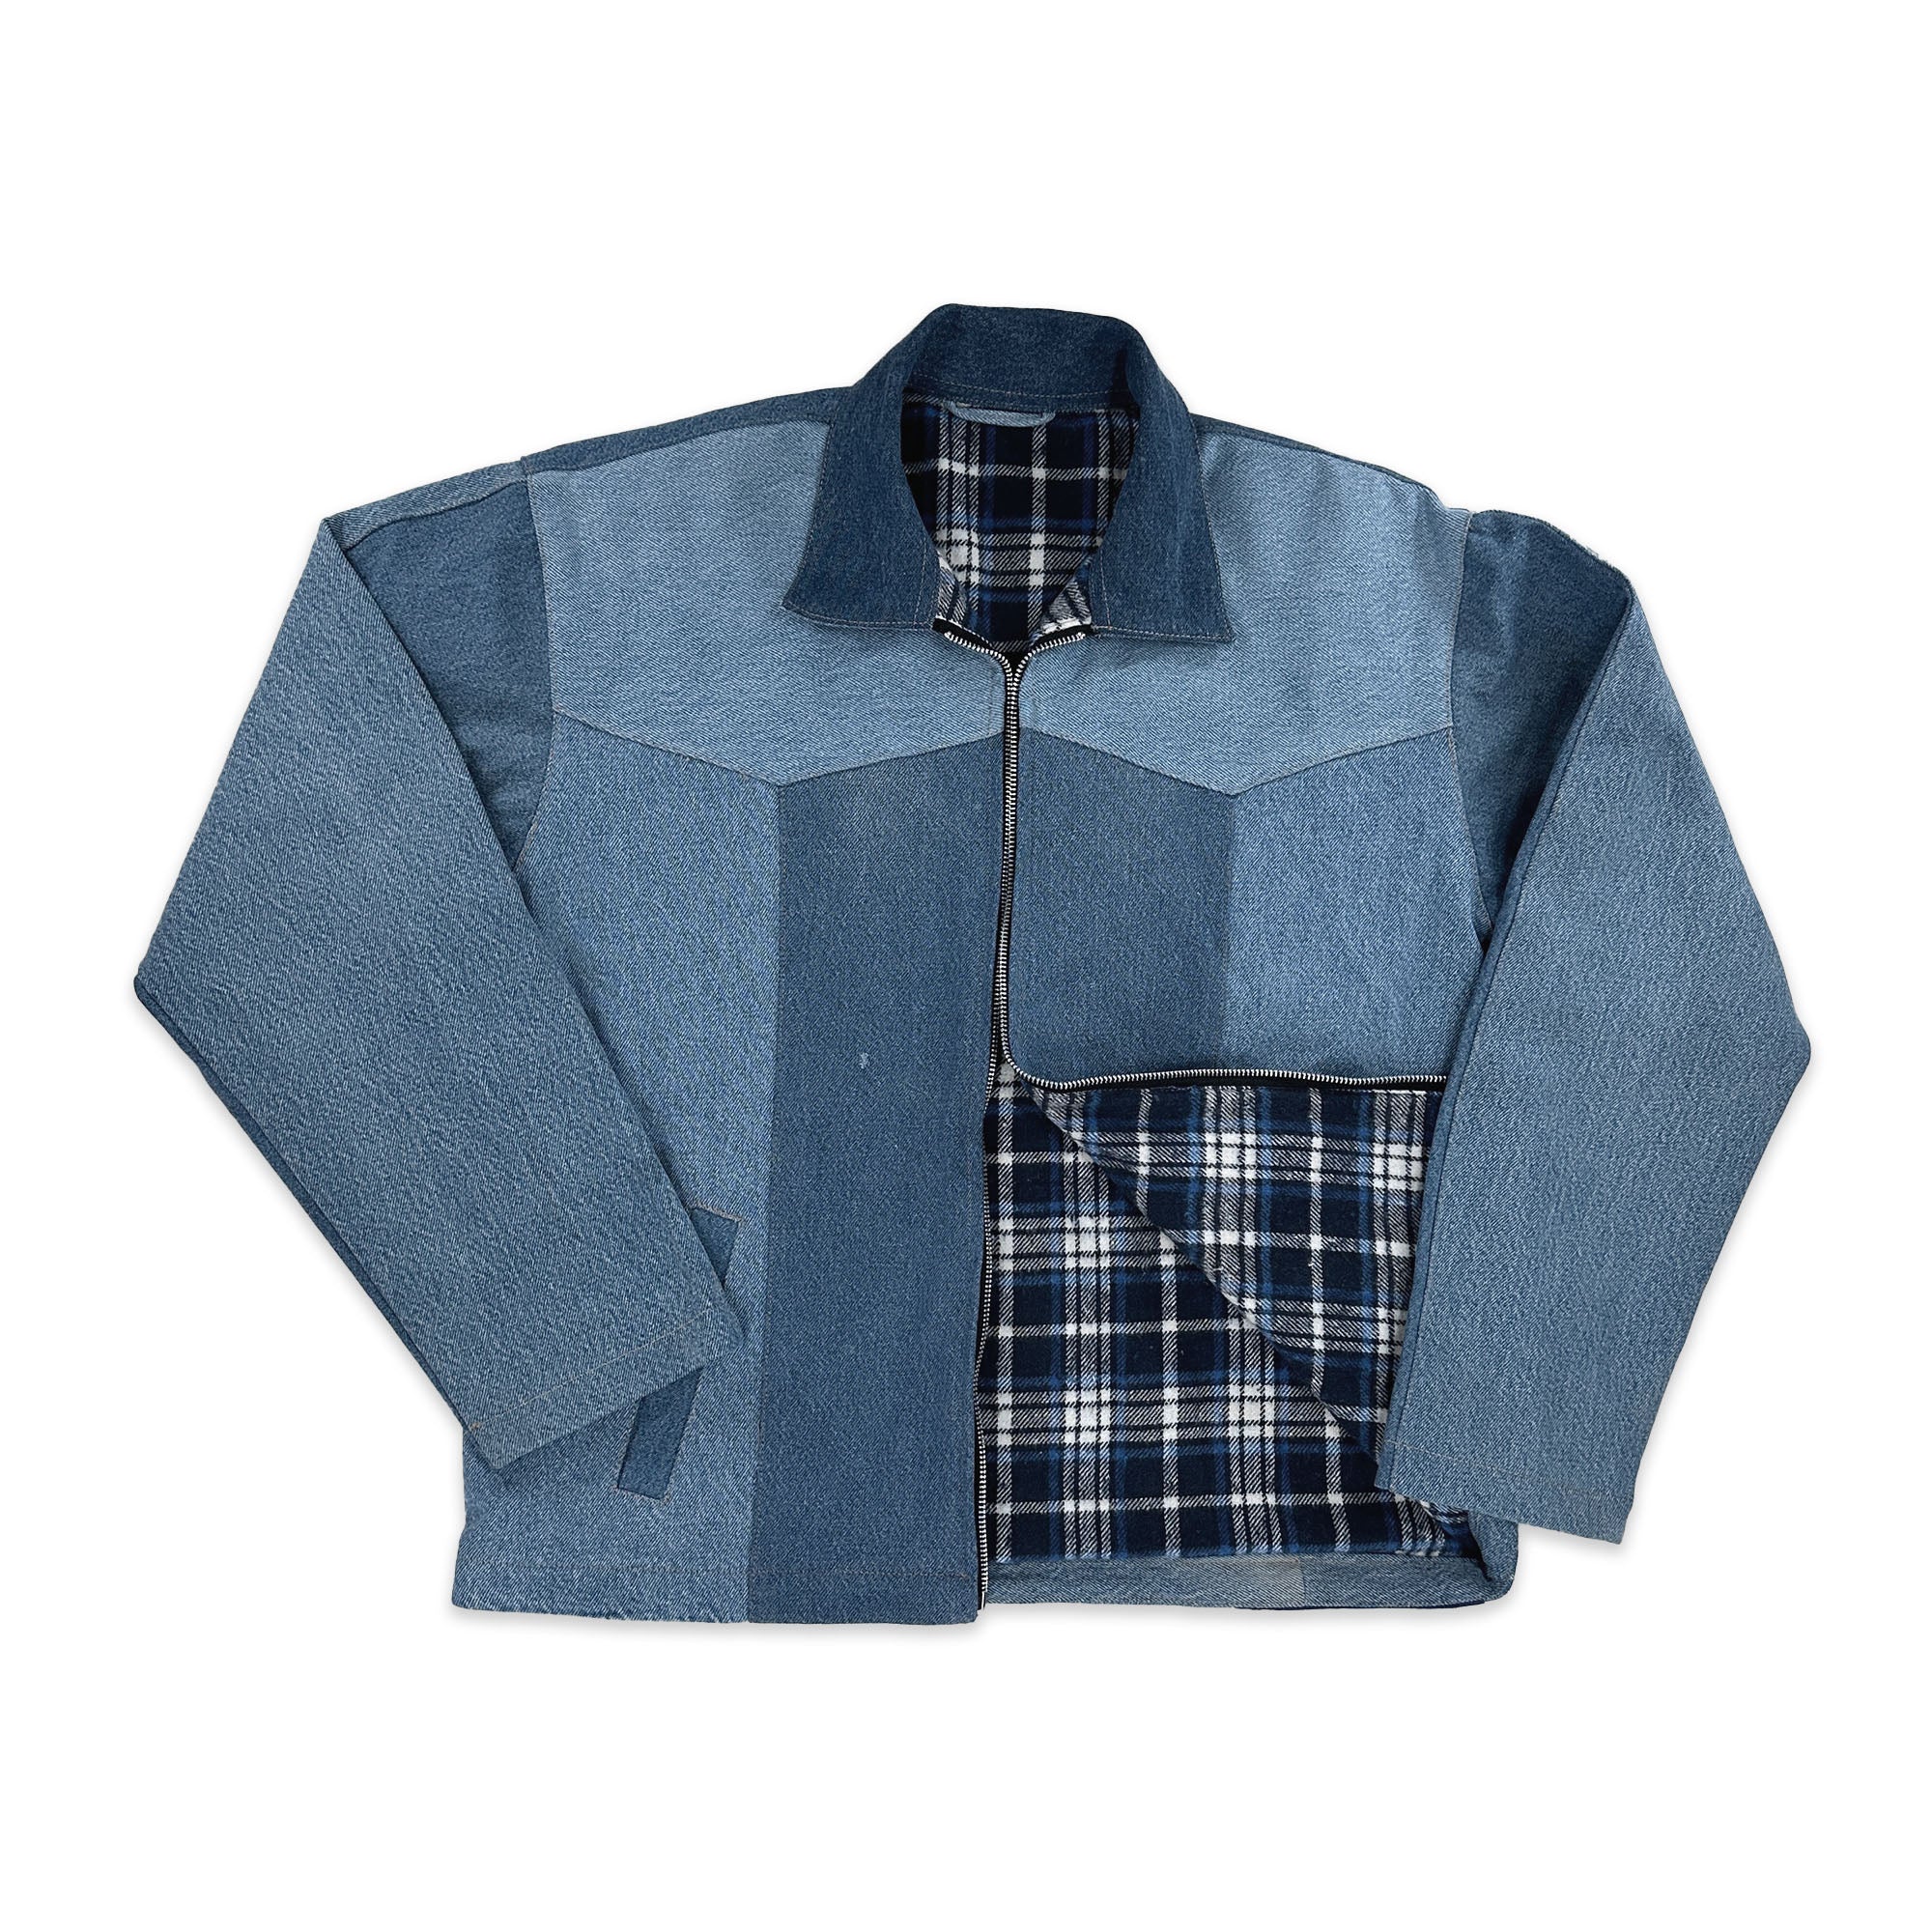 Chore Coat Made From Upcycled Work Jeans - Large Great Lakes Reclaimed Denim